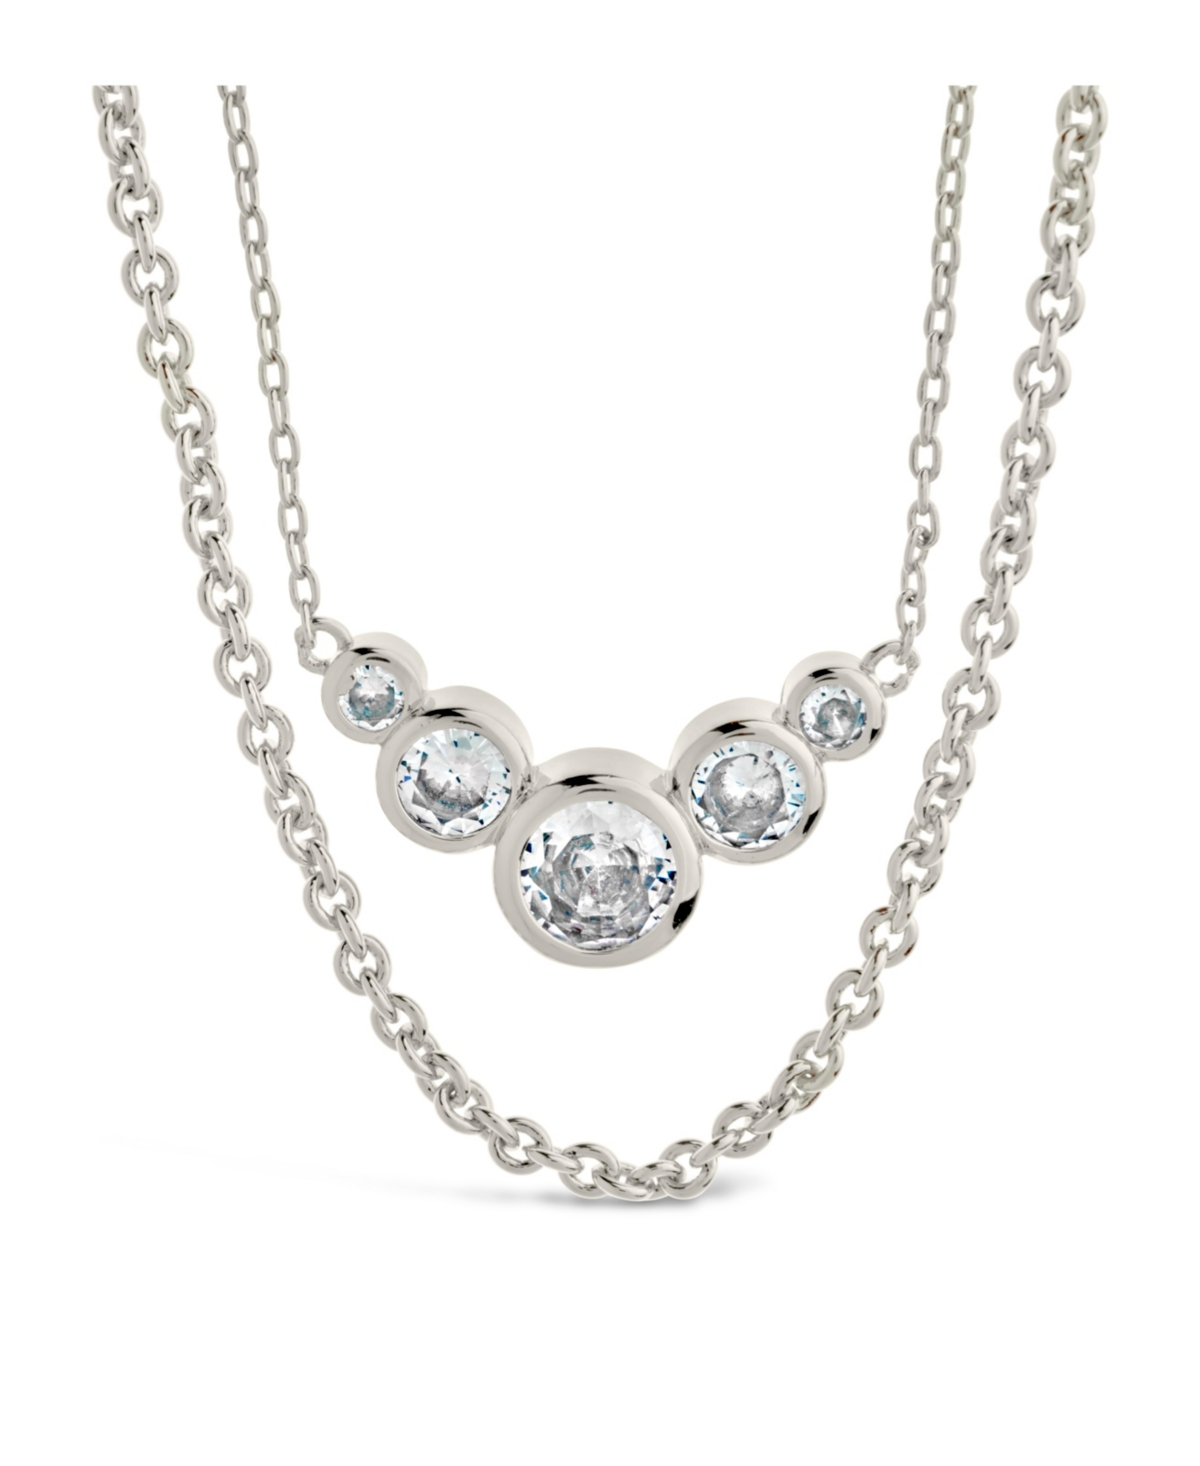 Cubic Zirconia Eileen Layered Necklace - Silver